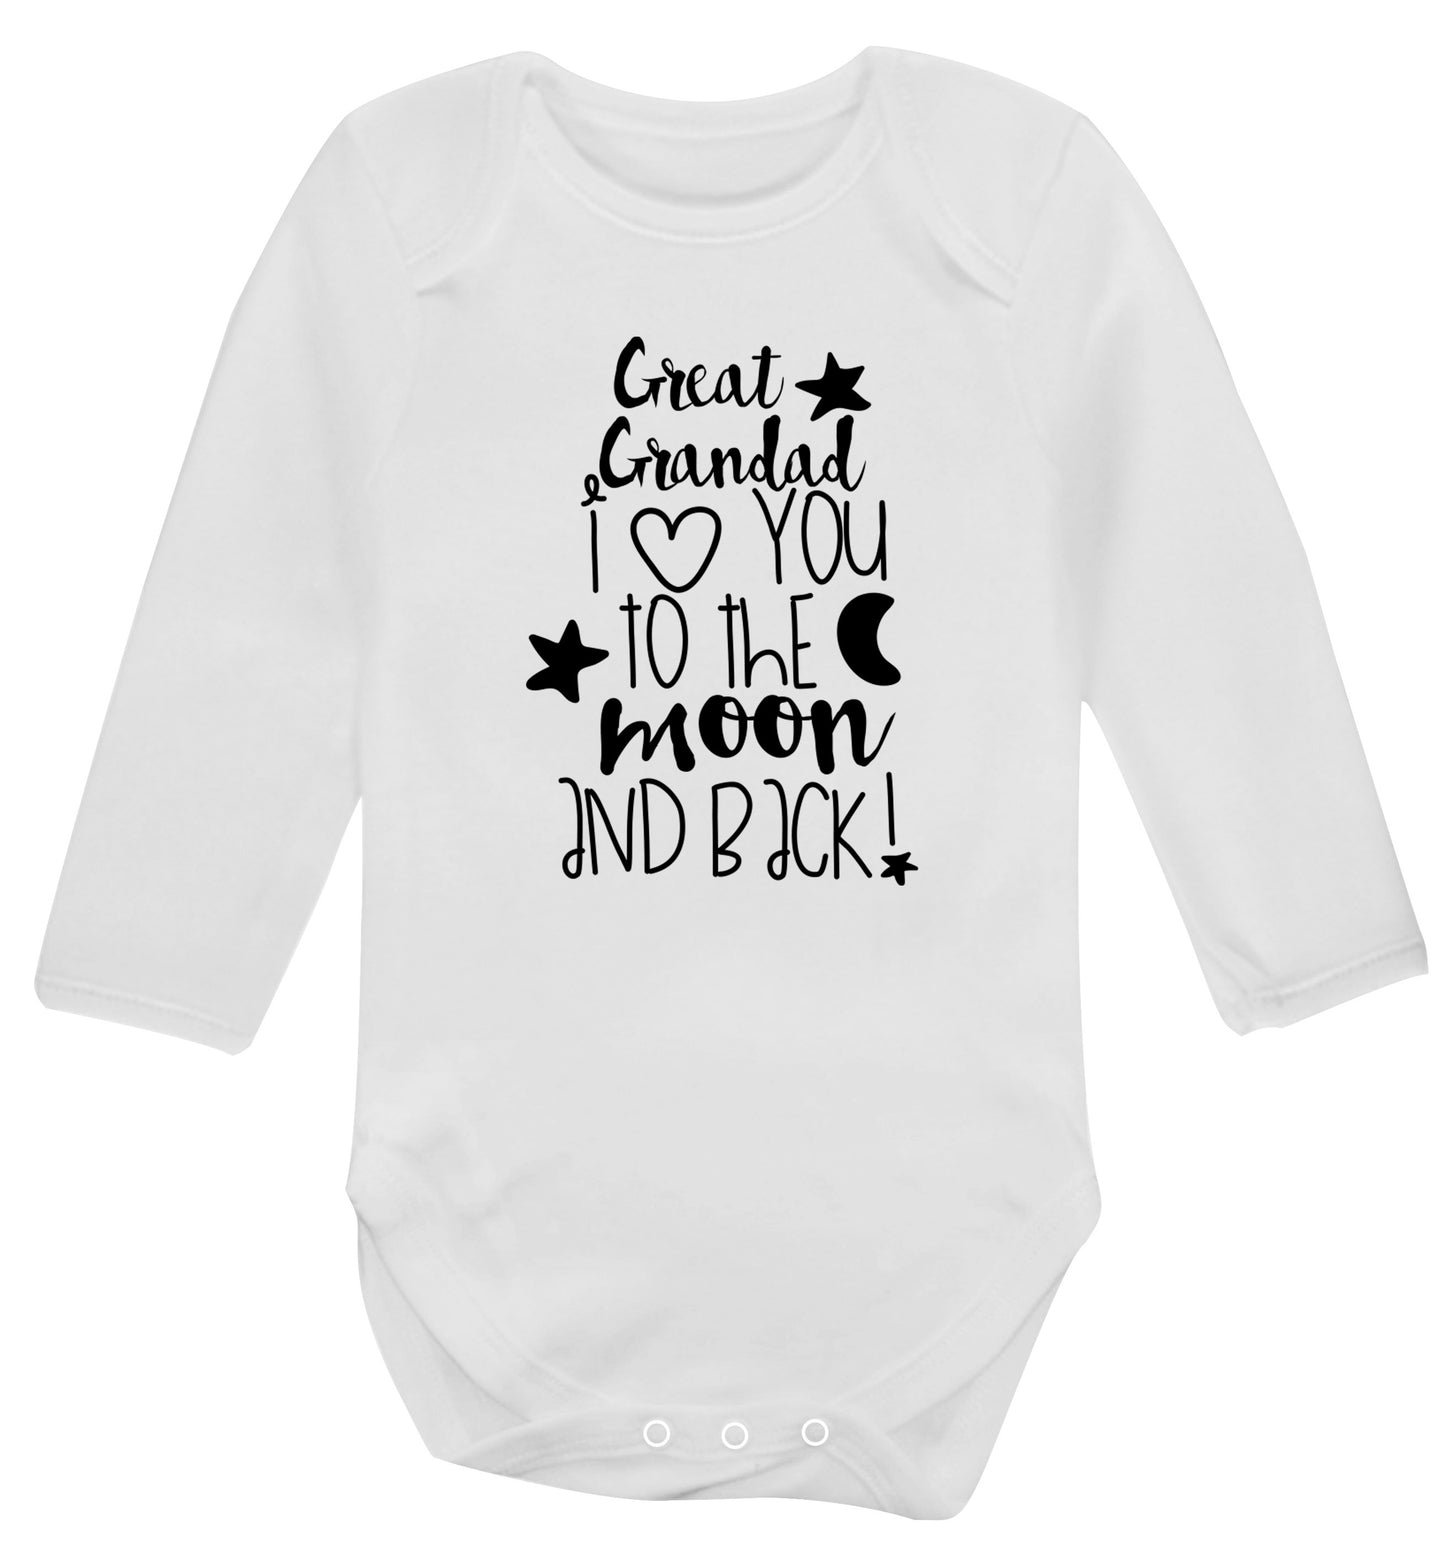 Great Grandad I love you to the moon and back Baby Vest long sleeved white 6-12 months